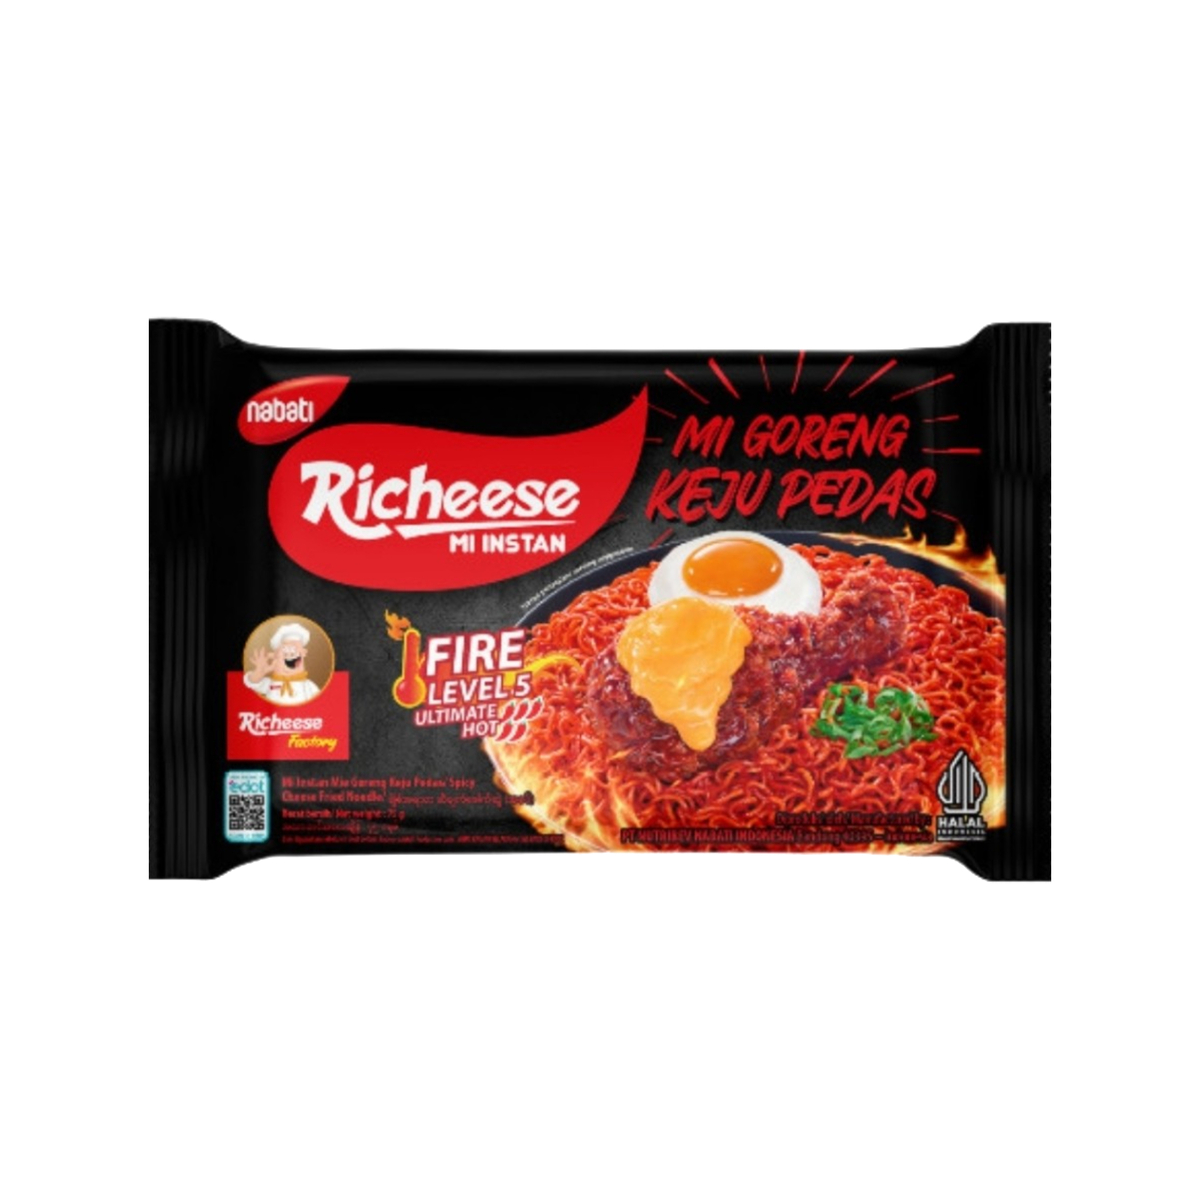 Richeese Noodle Ramen Cheese Ultimate Hot Lv5 67g